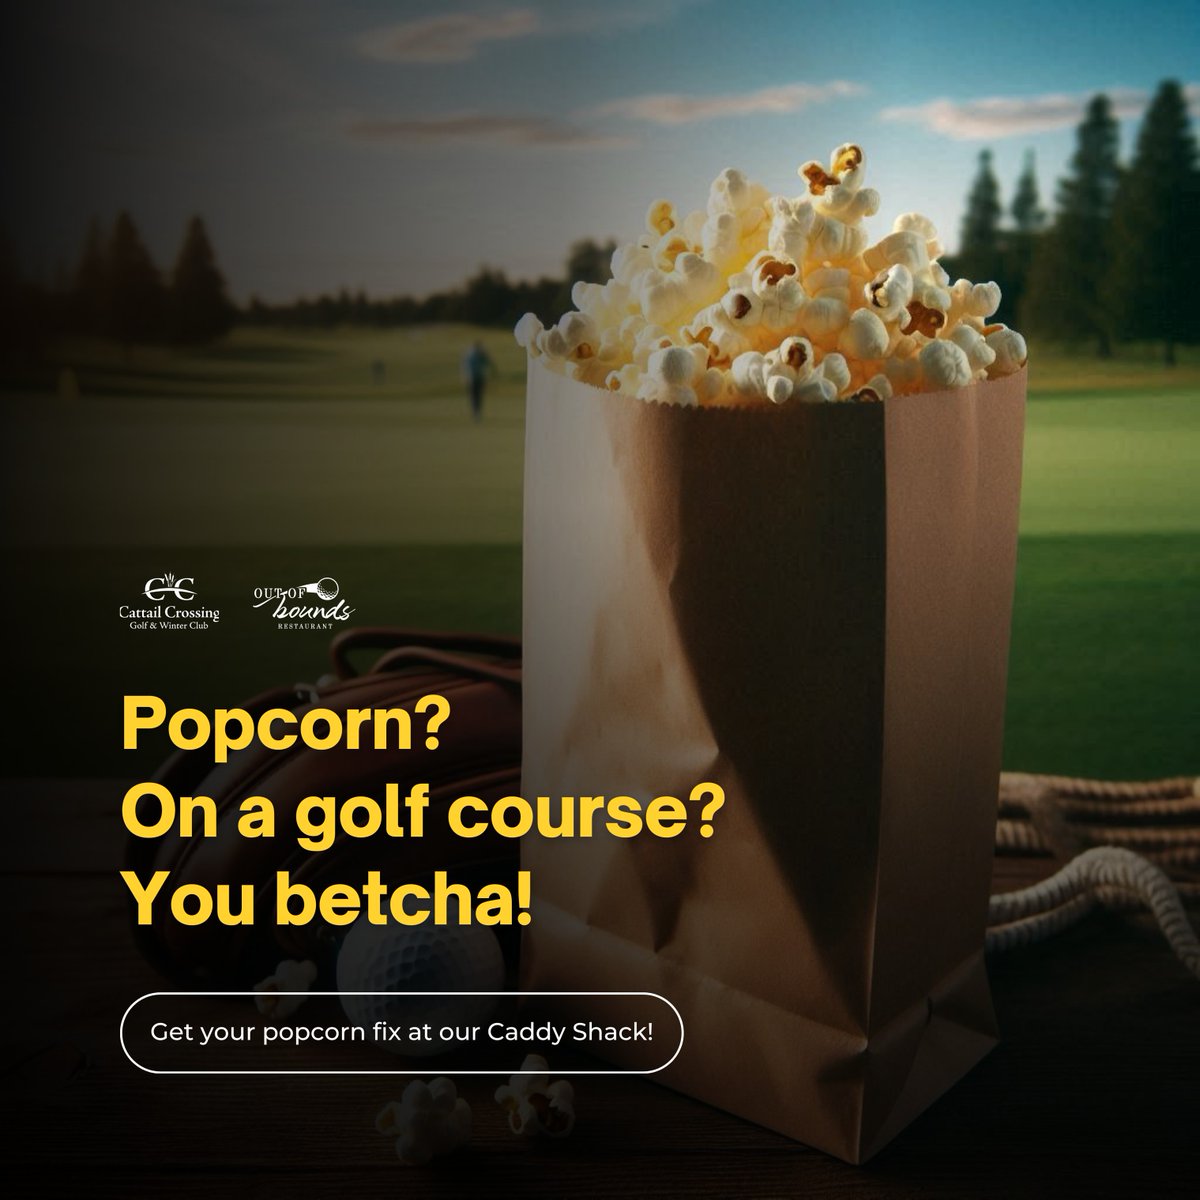 Popcorn on a golf course? You betcha! 🍿⛳️ Swing by our Caddy Shack/ Proshop at Cattail Crossing for your popcorn fix and a round of fun! 

Did we mention we're the only golf course in town where you can enjoy delicious popcorn while teeing off? 😉